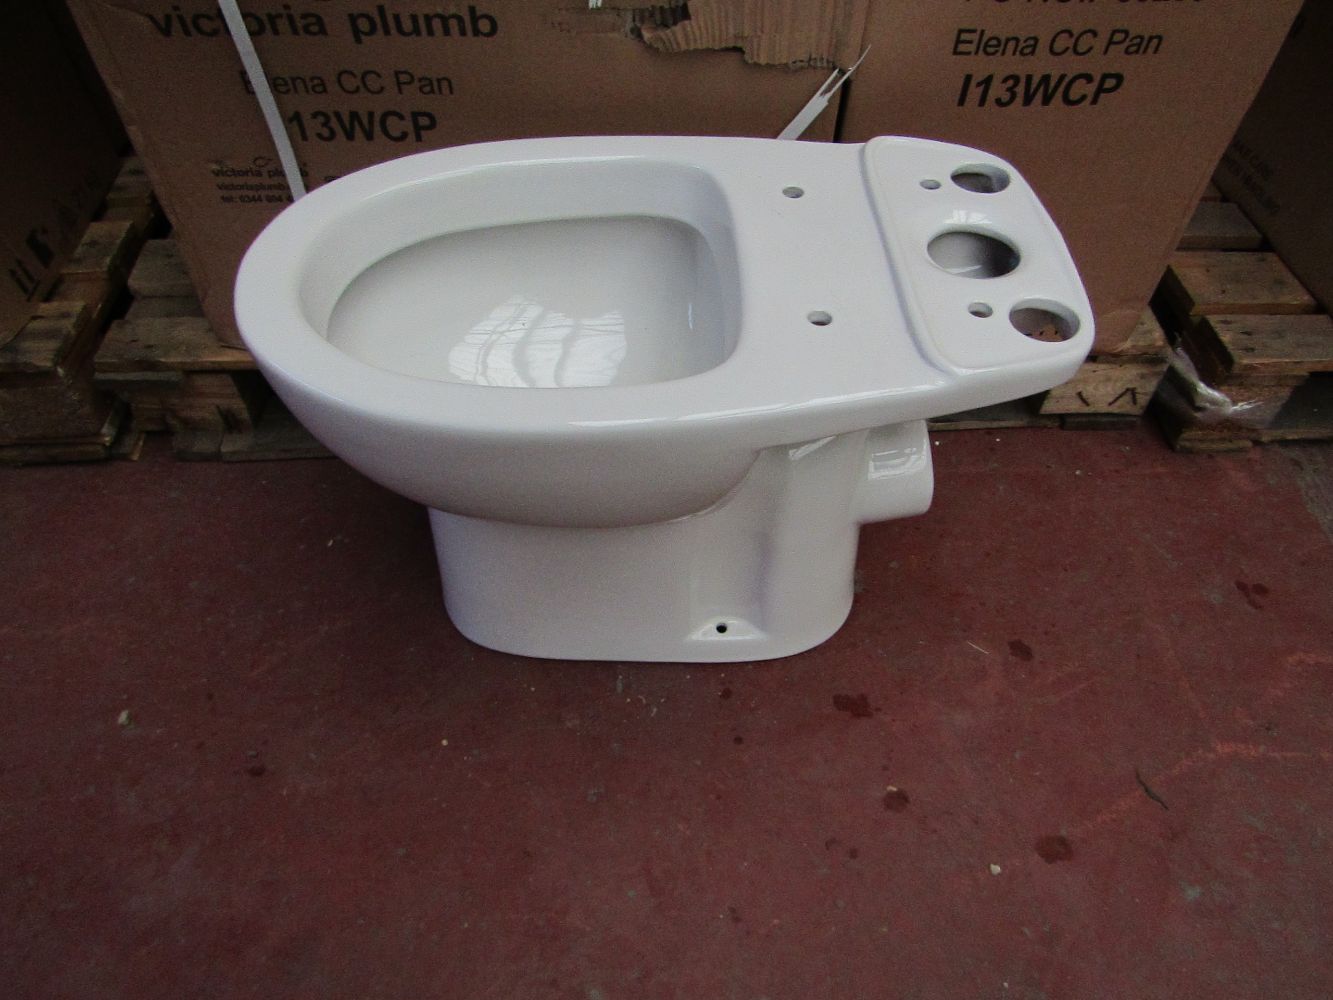 SUPER LOW OPEN BIDS! Fresh delivery of bathroom stock including; Johnson Tiles, toilet pans, bathroom accessories and much more!